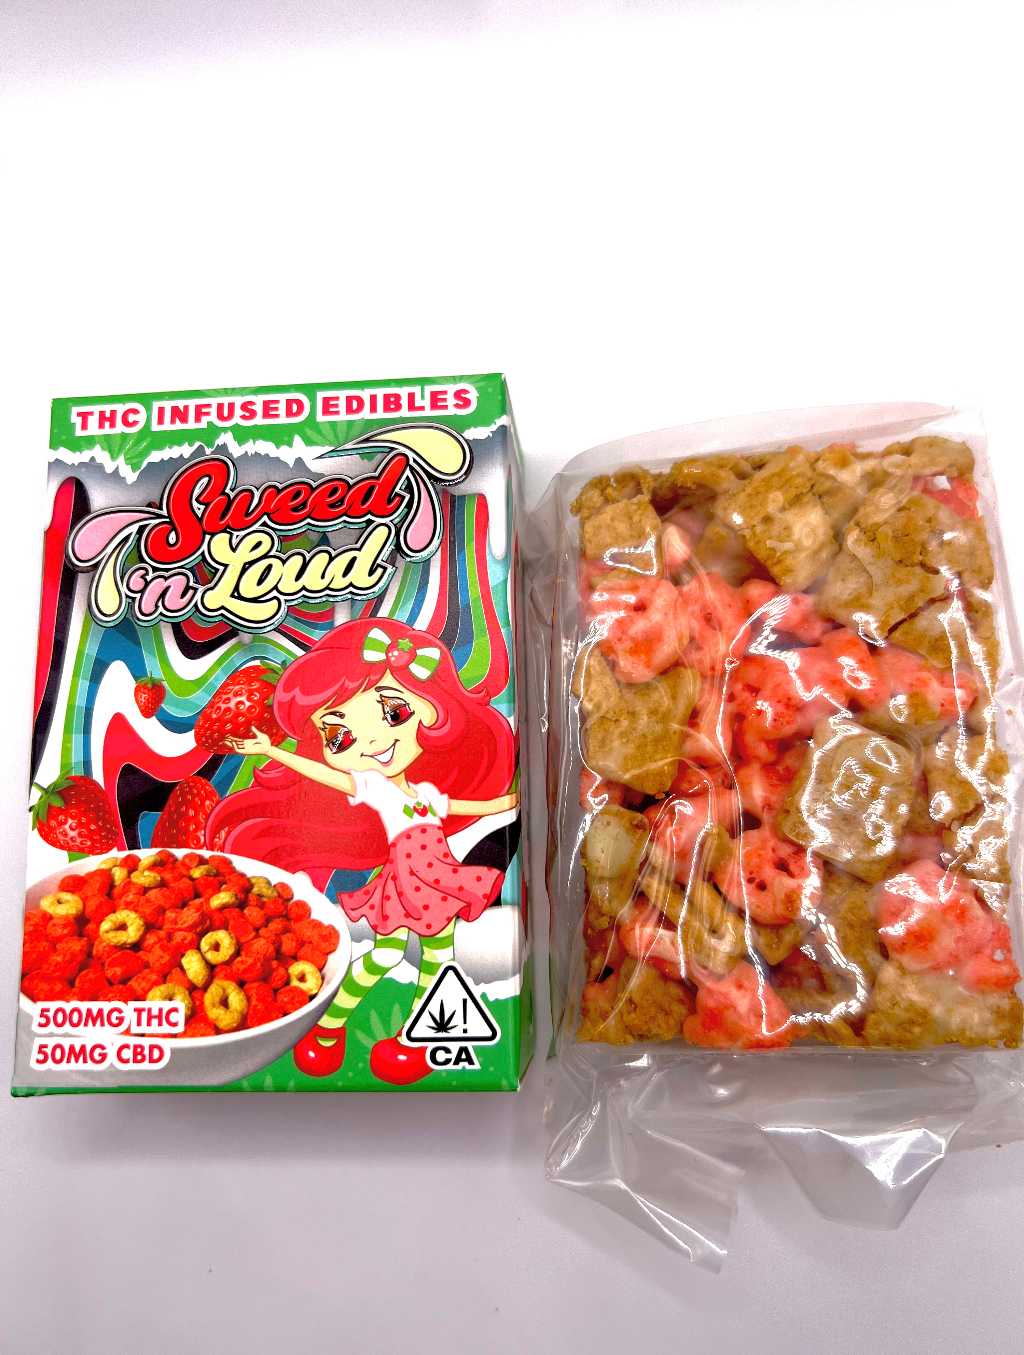 Sweed N Loud Strawberry Short Cake Cereal Bars 500mg